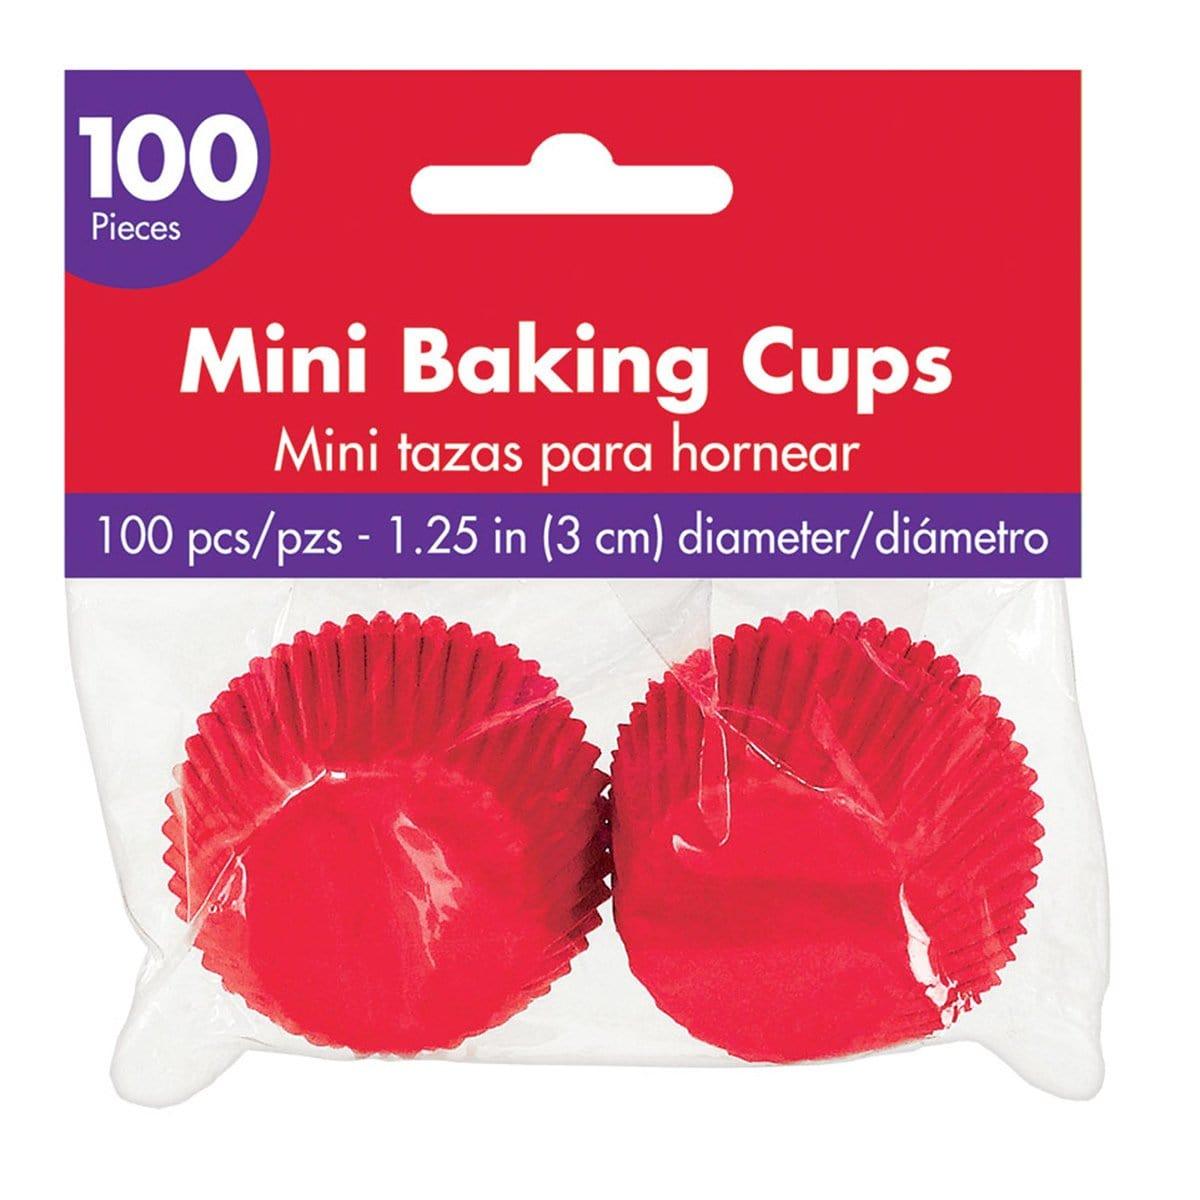 Buy Cake Supplies Mini Cupcake Cases 100/pkg - Red sold at Party Expert